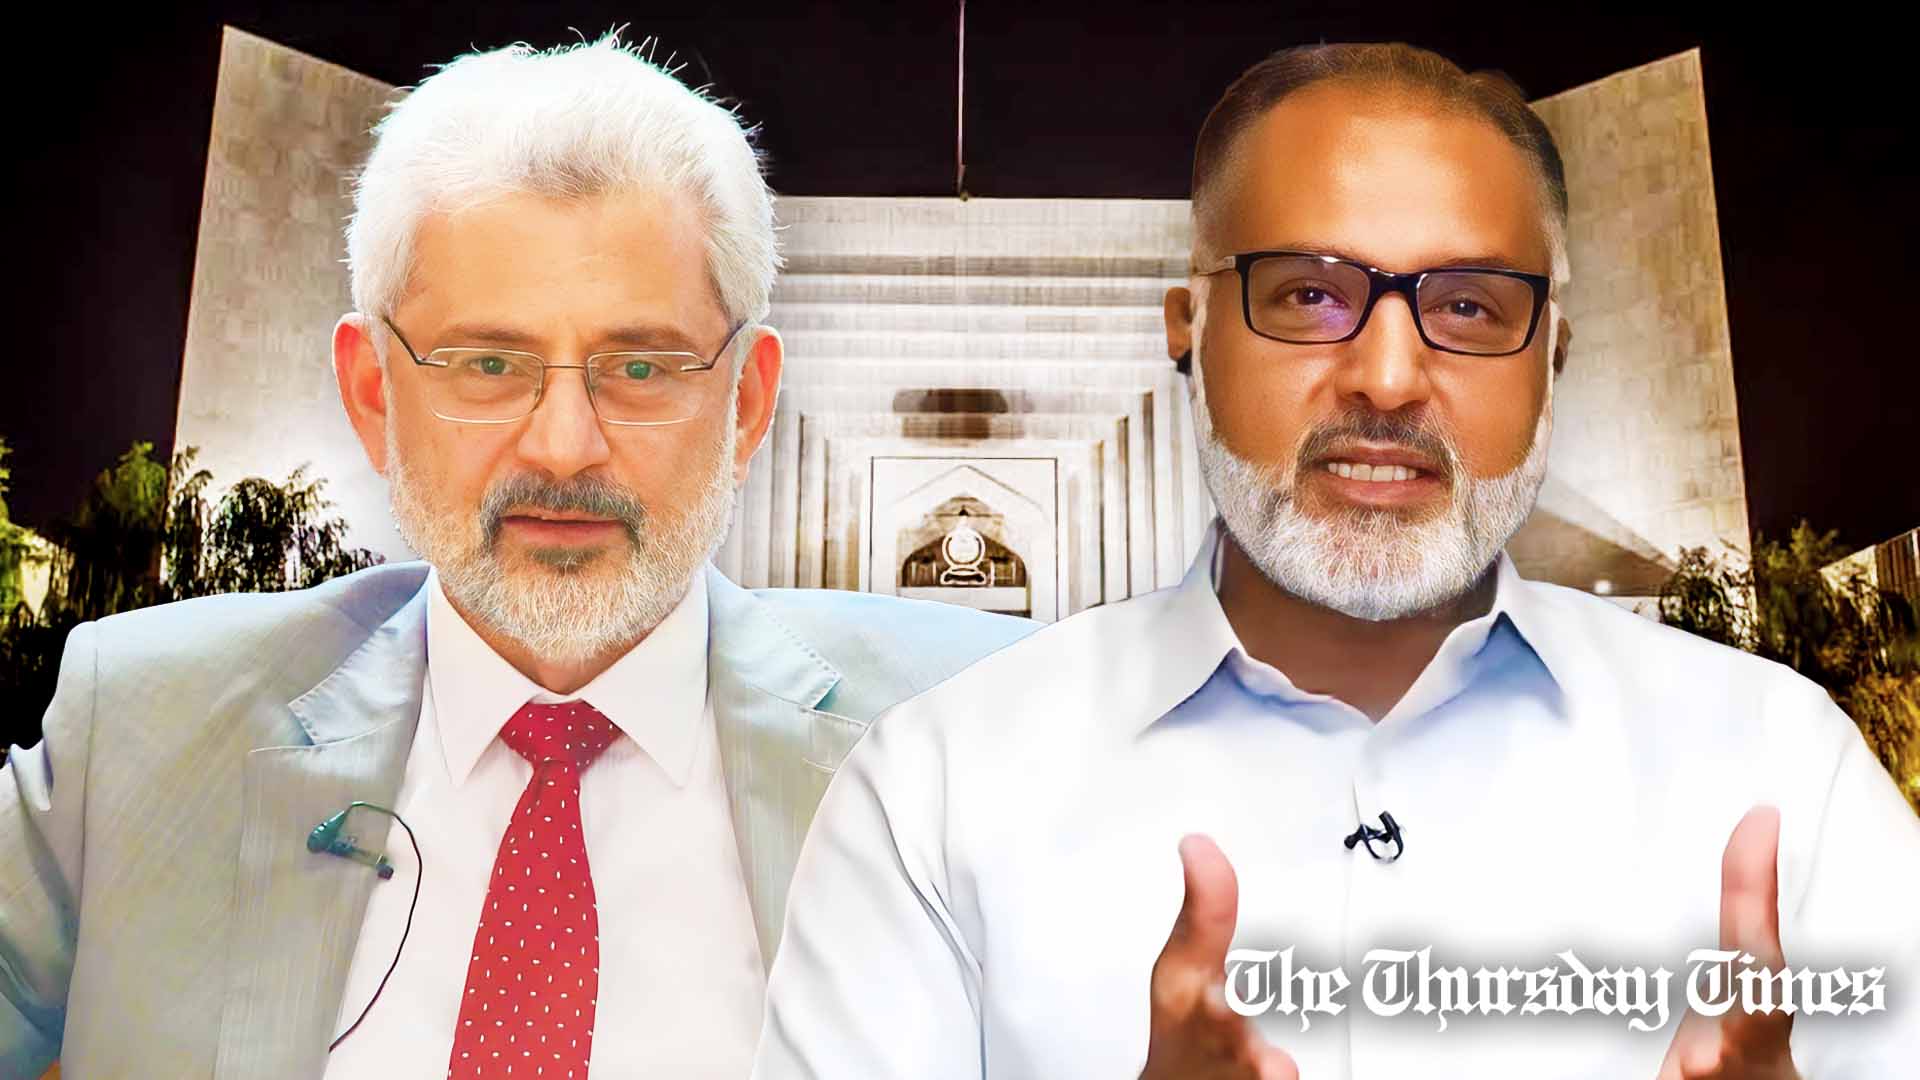 A combined file photo is shown of Chief Justice of Pakistan Qazi Faez Isa (L) and former Islamabad High Court senior justice Shaukat Aziz Siddiqui. — FILE/THE THURSDAY TIMES